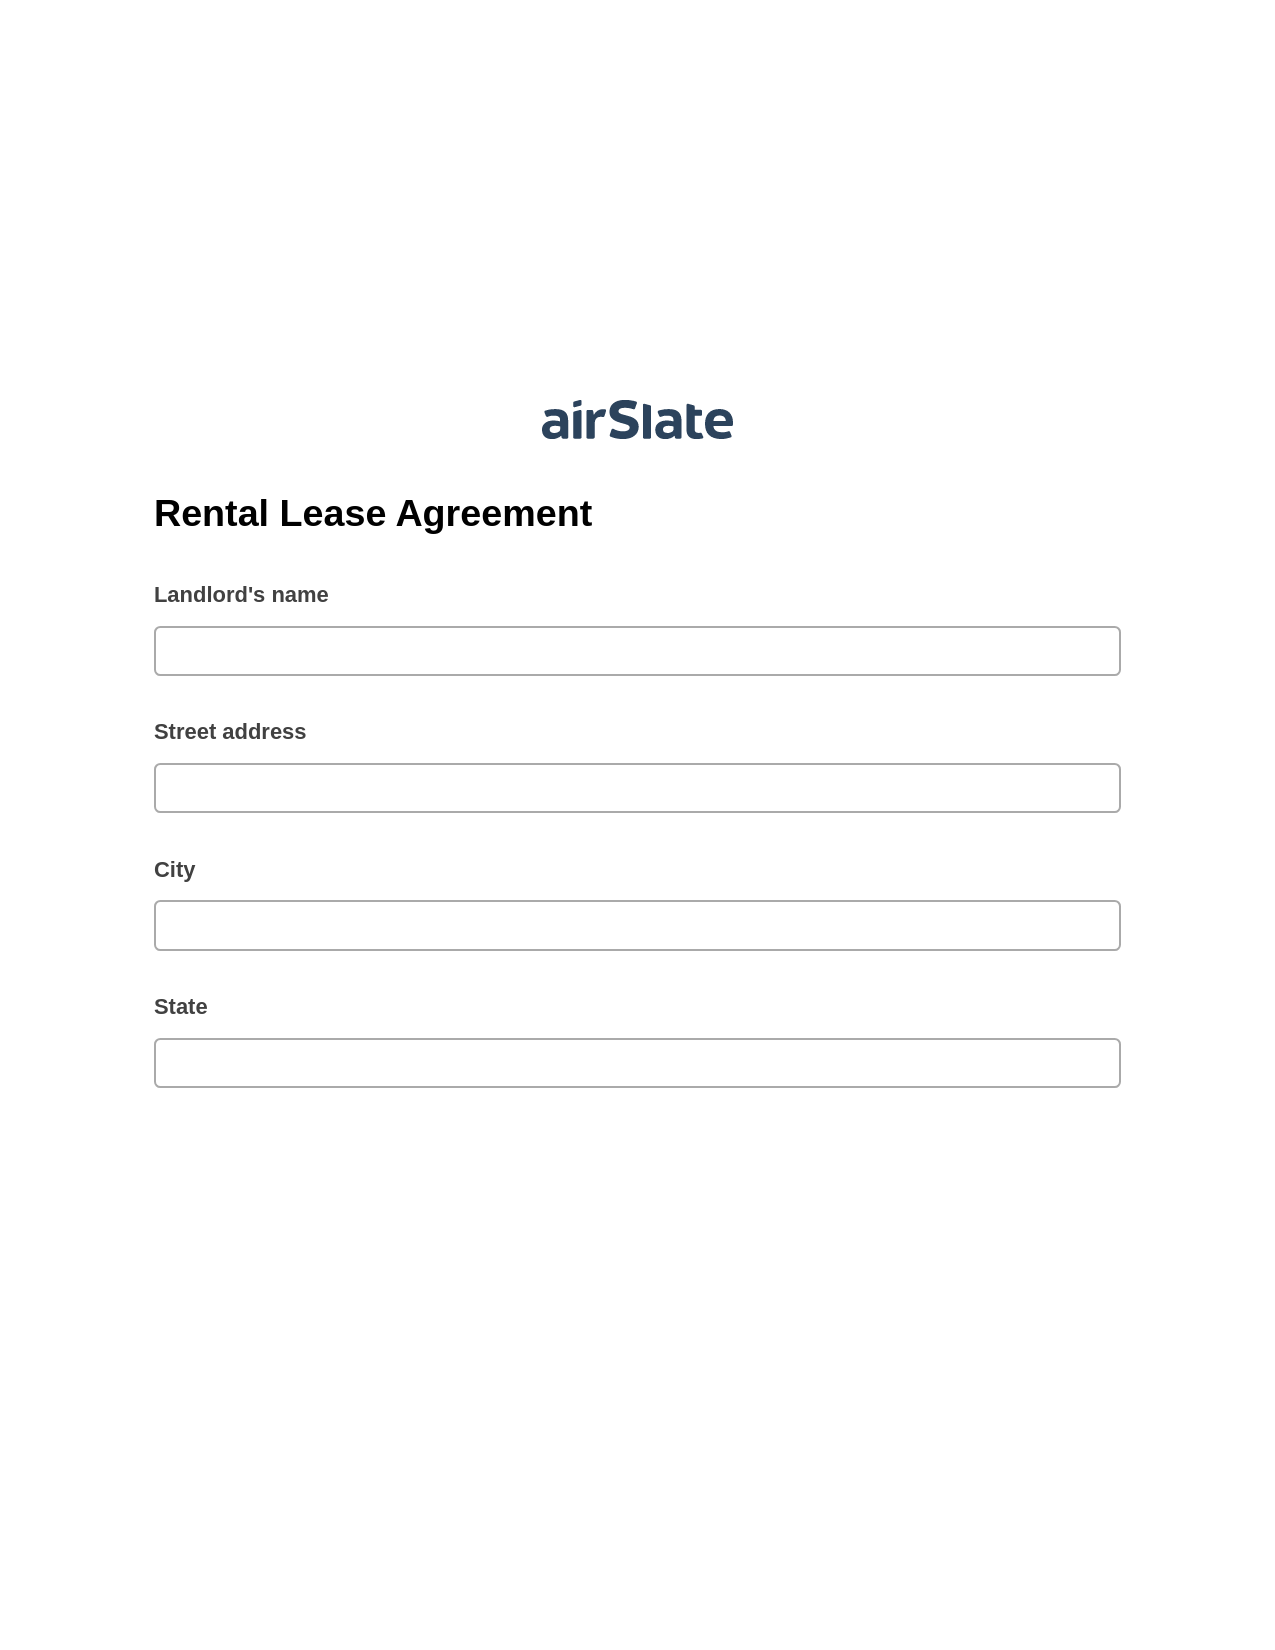 Rental Lease Agreement Pre-fill from Smartsheet Bot, Document Hide Bot, Export to Formstack Documents Bot